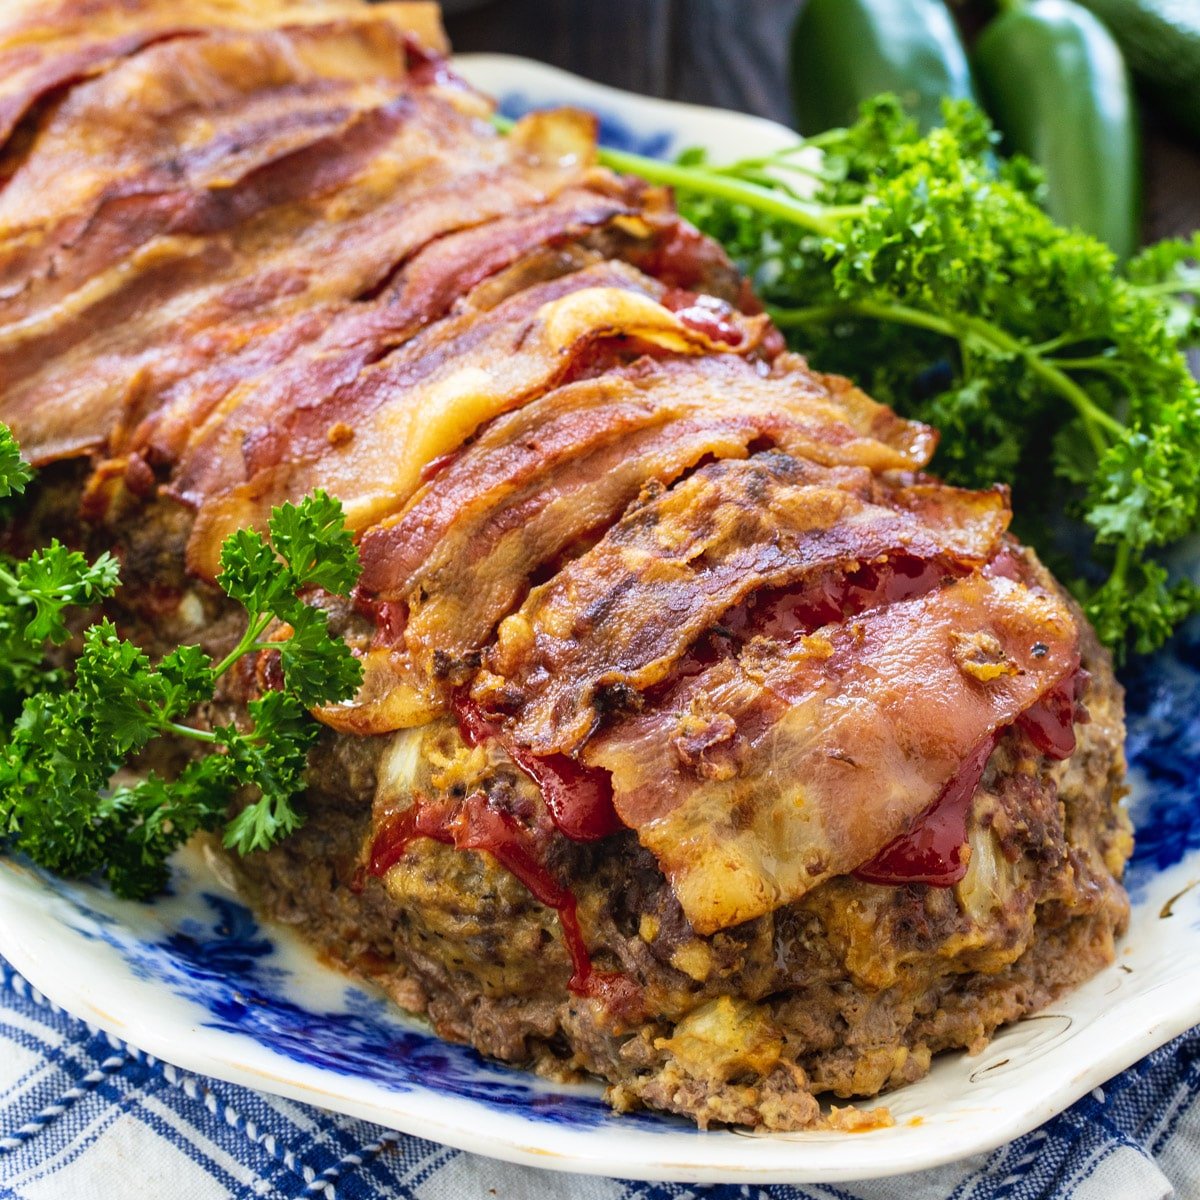 Jalapeno Popper Stuffed Meatloaf on serving platter with parsley.